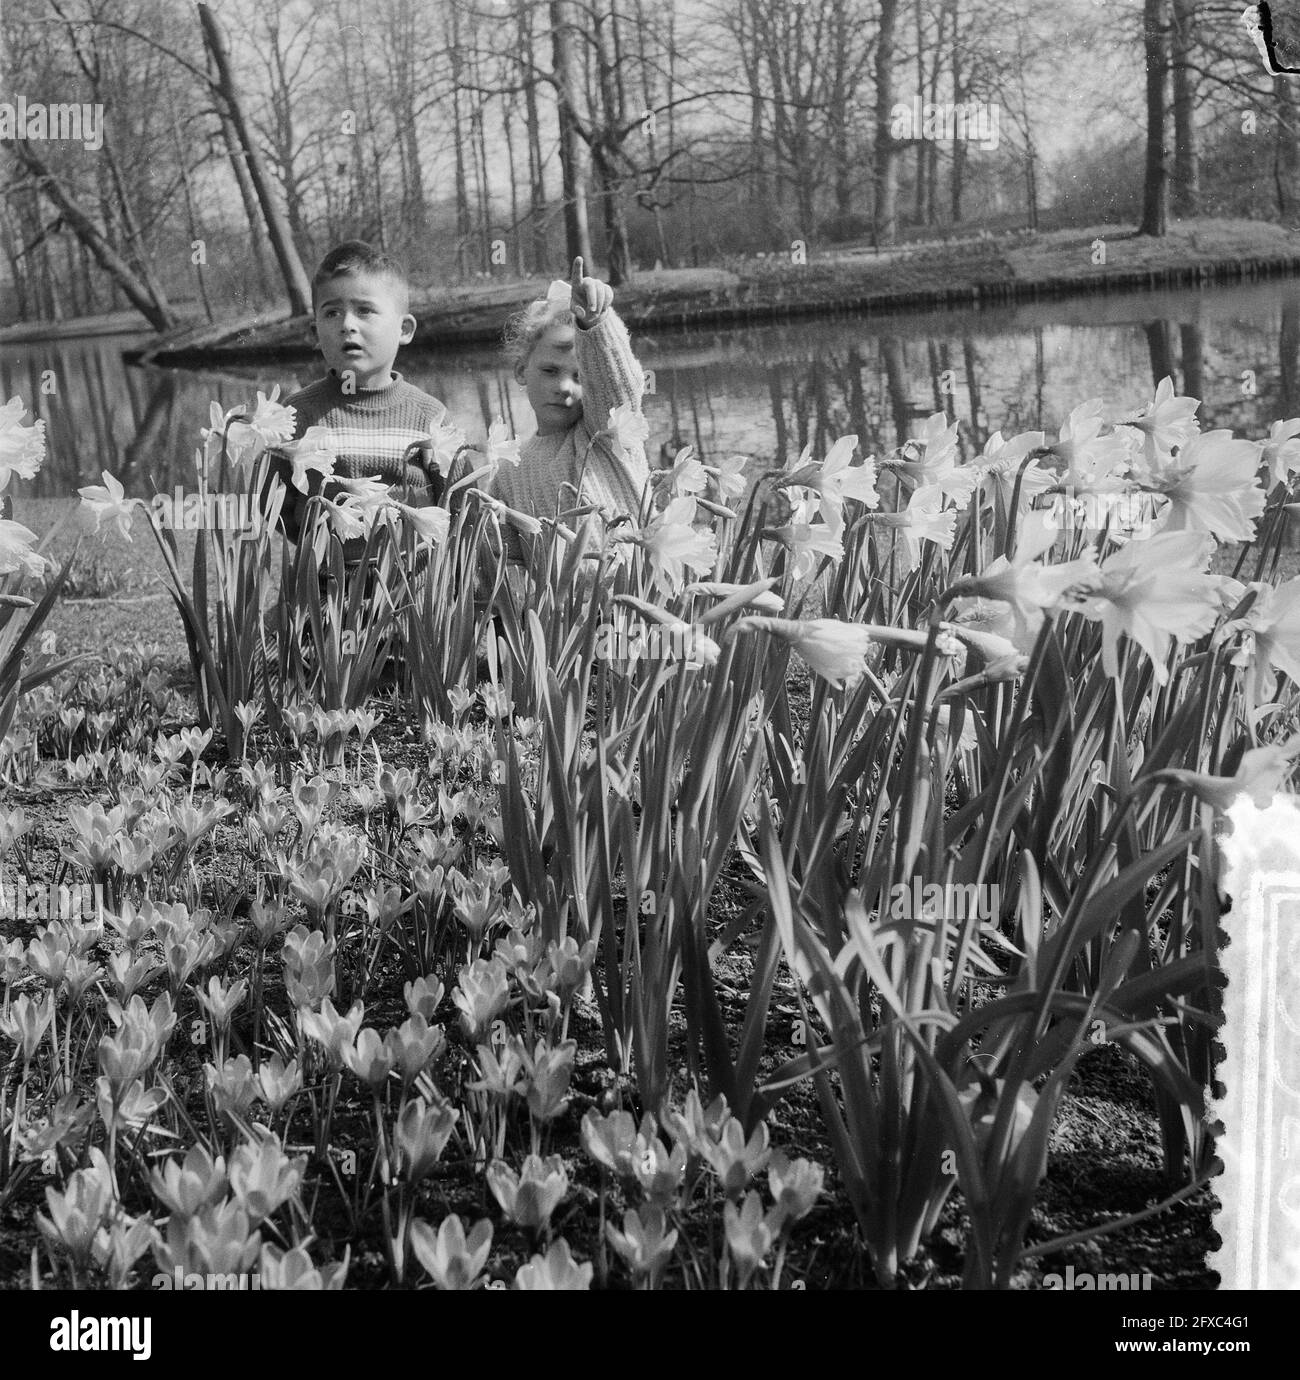 Children in daffodil fields in the Keukenhof at Lisse, March 12, 1957, flowers, children, parks, The Netherlands, 20th century press agency photo, news to remember, documentary, historic photography 1945-1990, visual stories, human history of the Twentieth Century, capturing moments in time Stock Photo